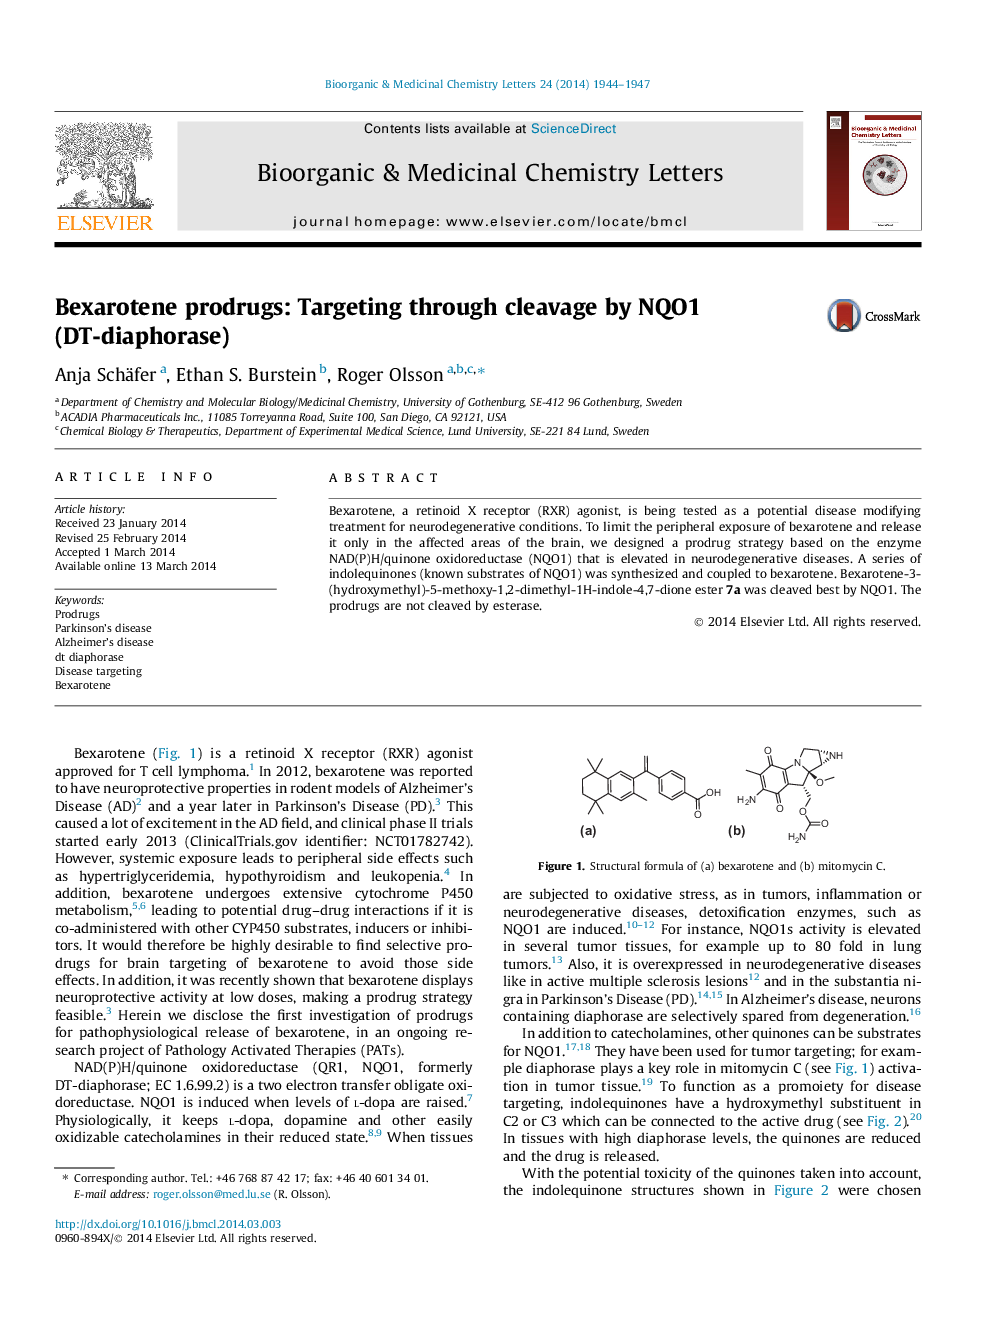 Bexarotene prodrugs: Targeting through cleavage by NQO1 (DT-diaphorase)